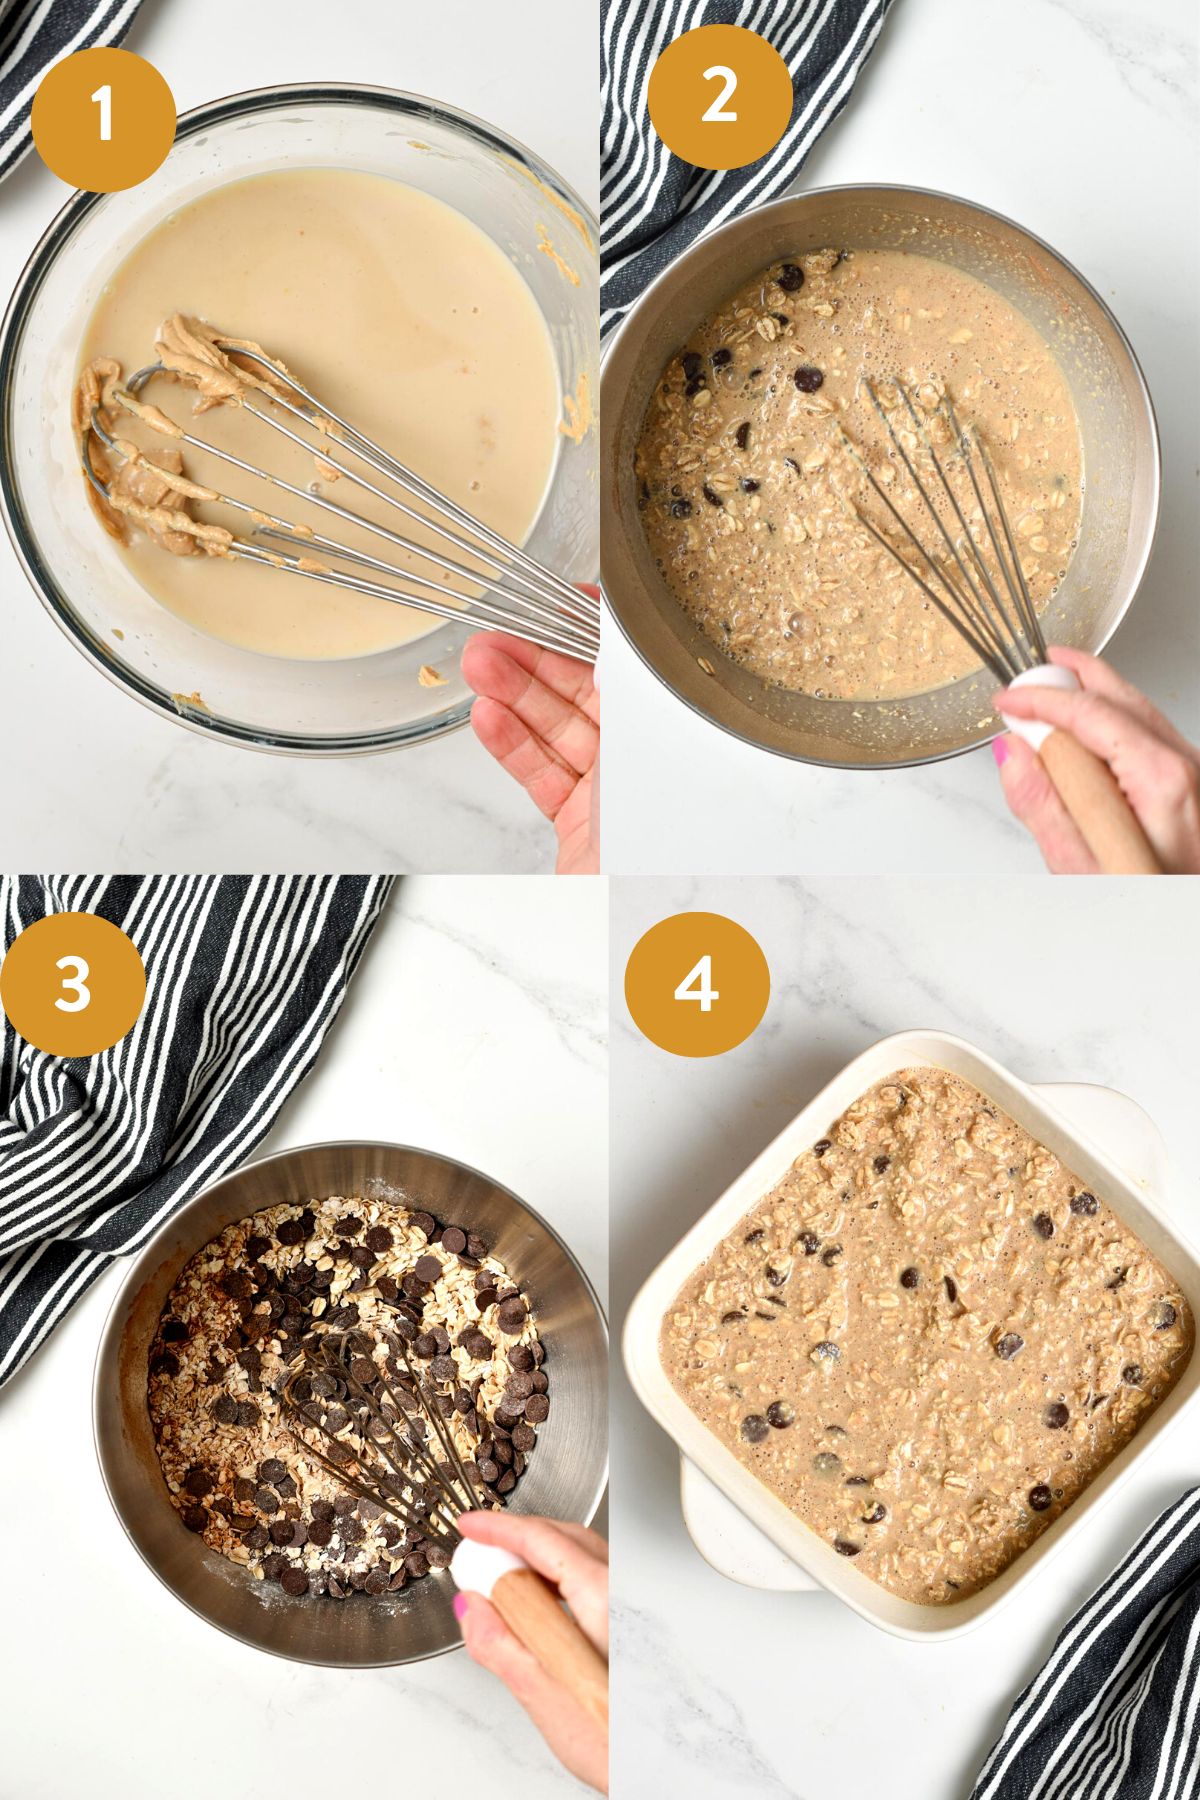 How to make peanut butter Baked Oatmeal